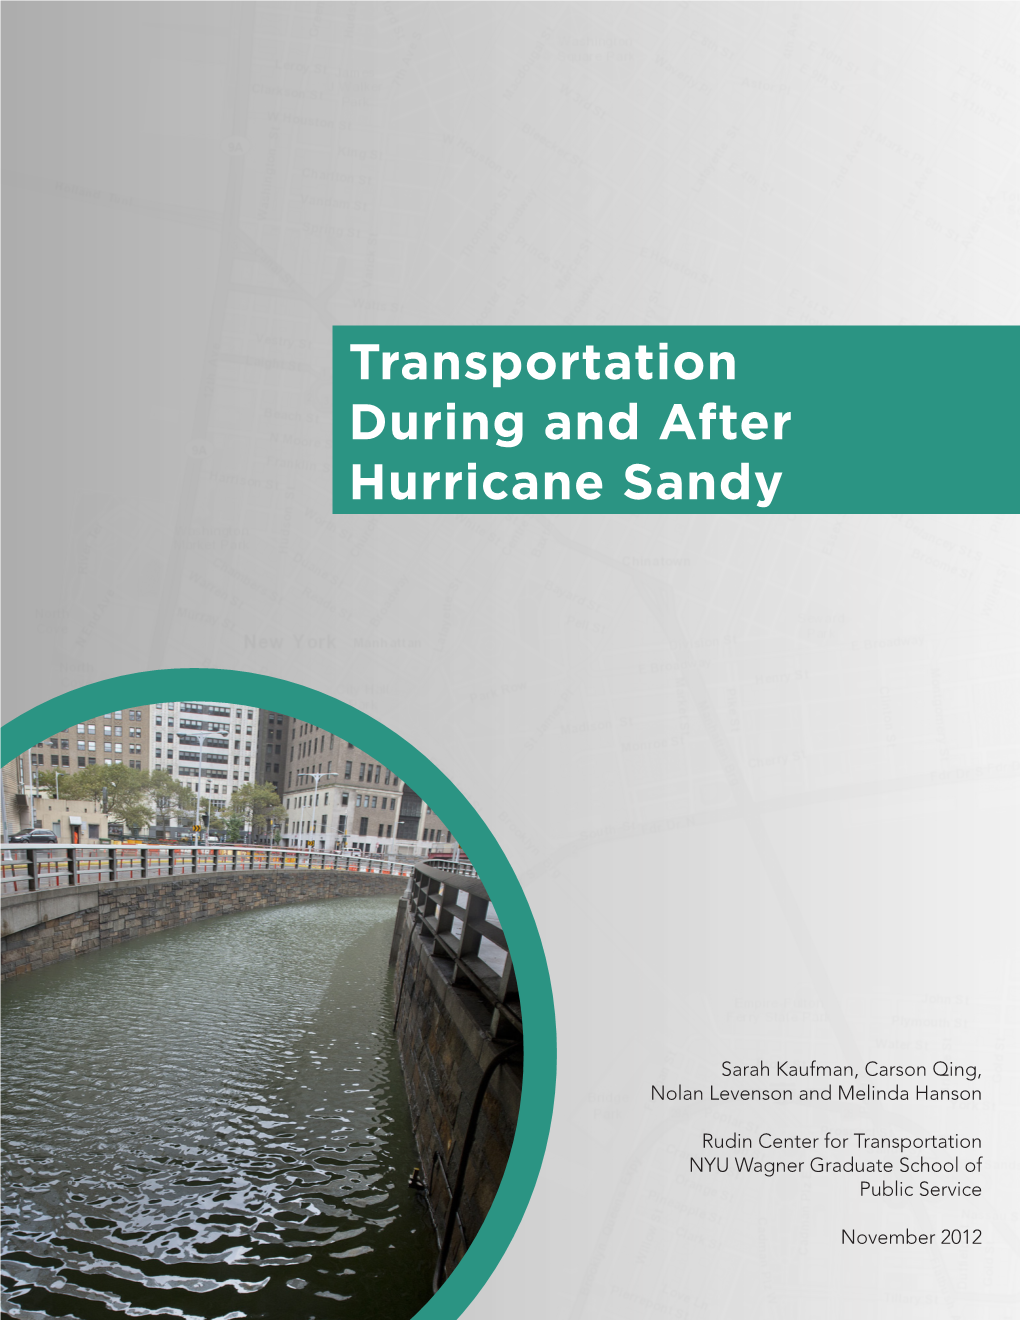 Transportation During and After Hurricane Sandy